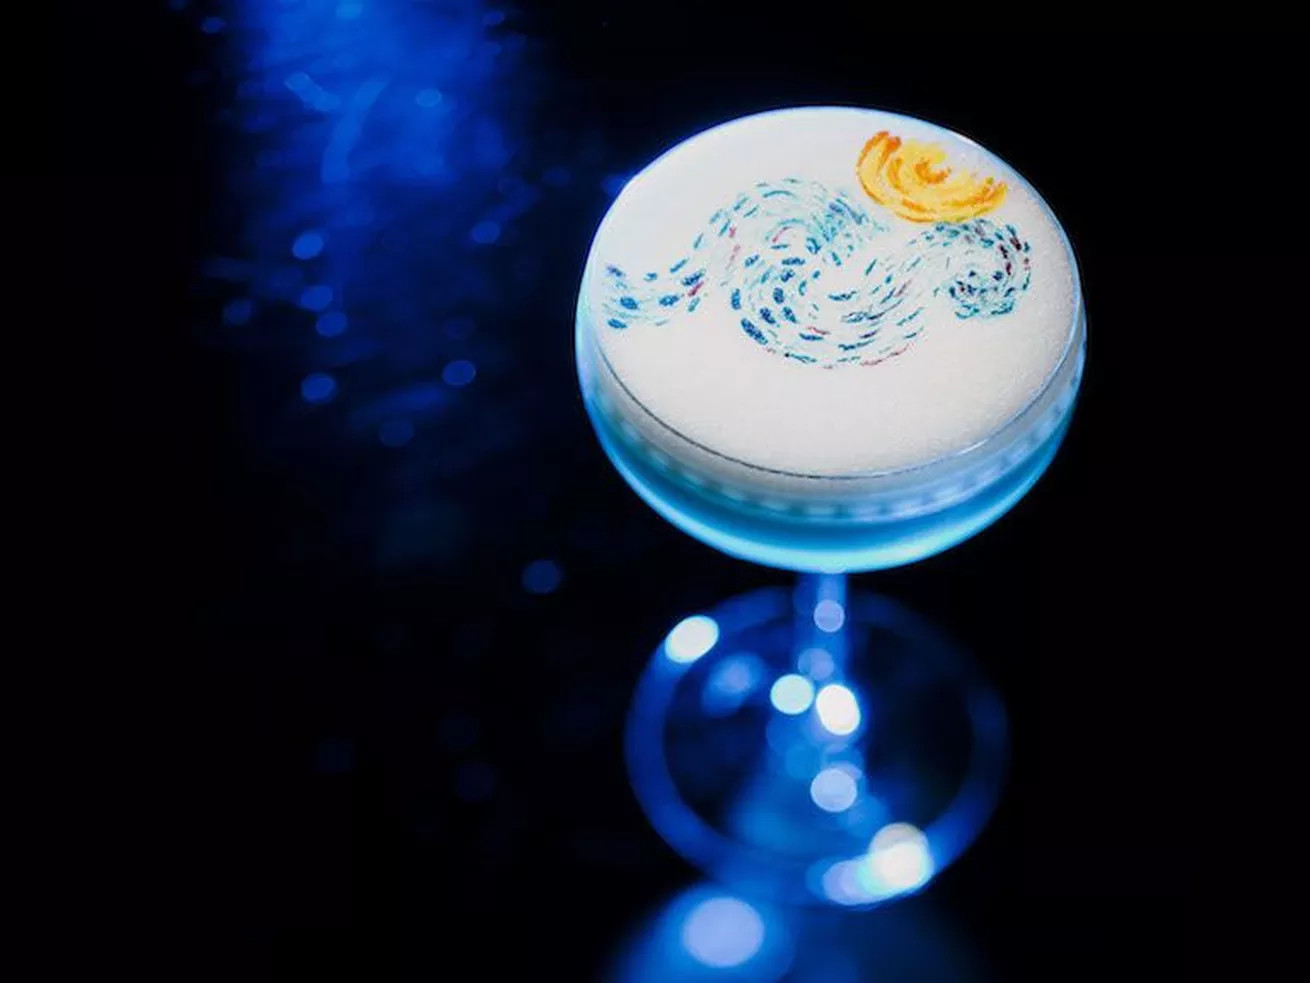 Don’t Even Think About Ruining These Art-Inspired Cocktails By Drinking Them